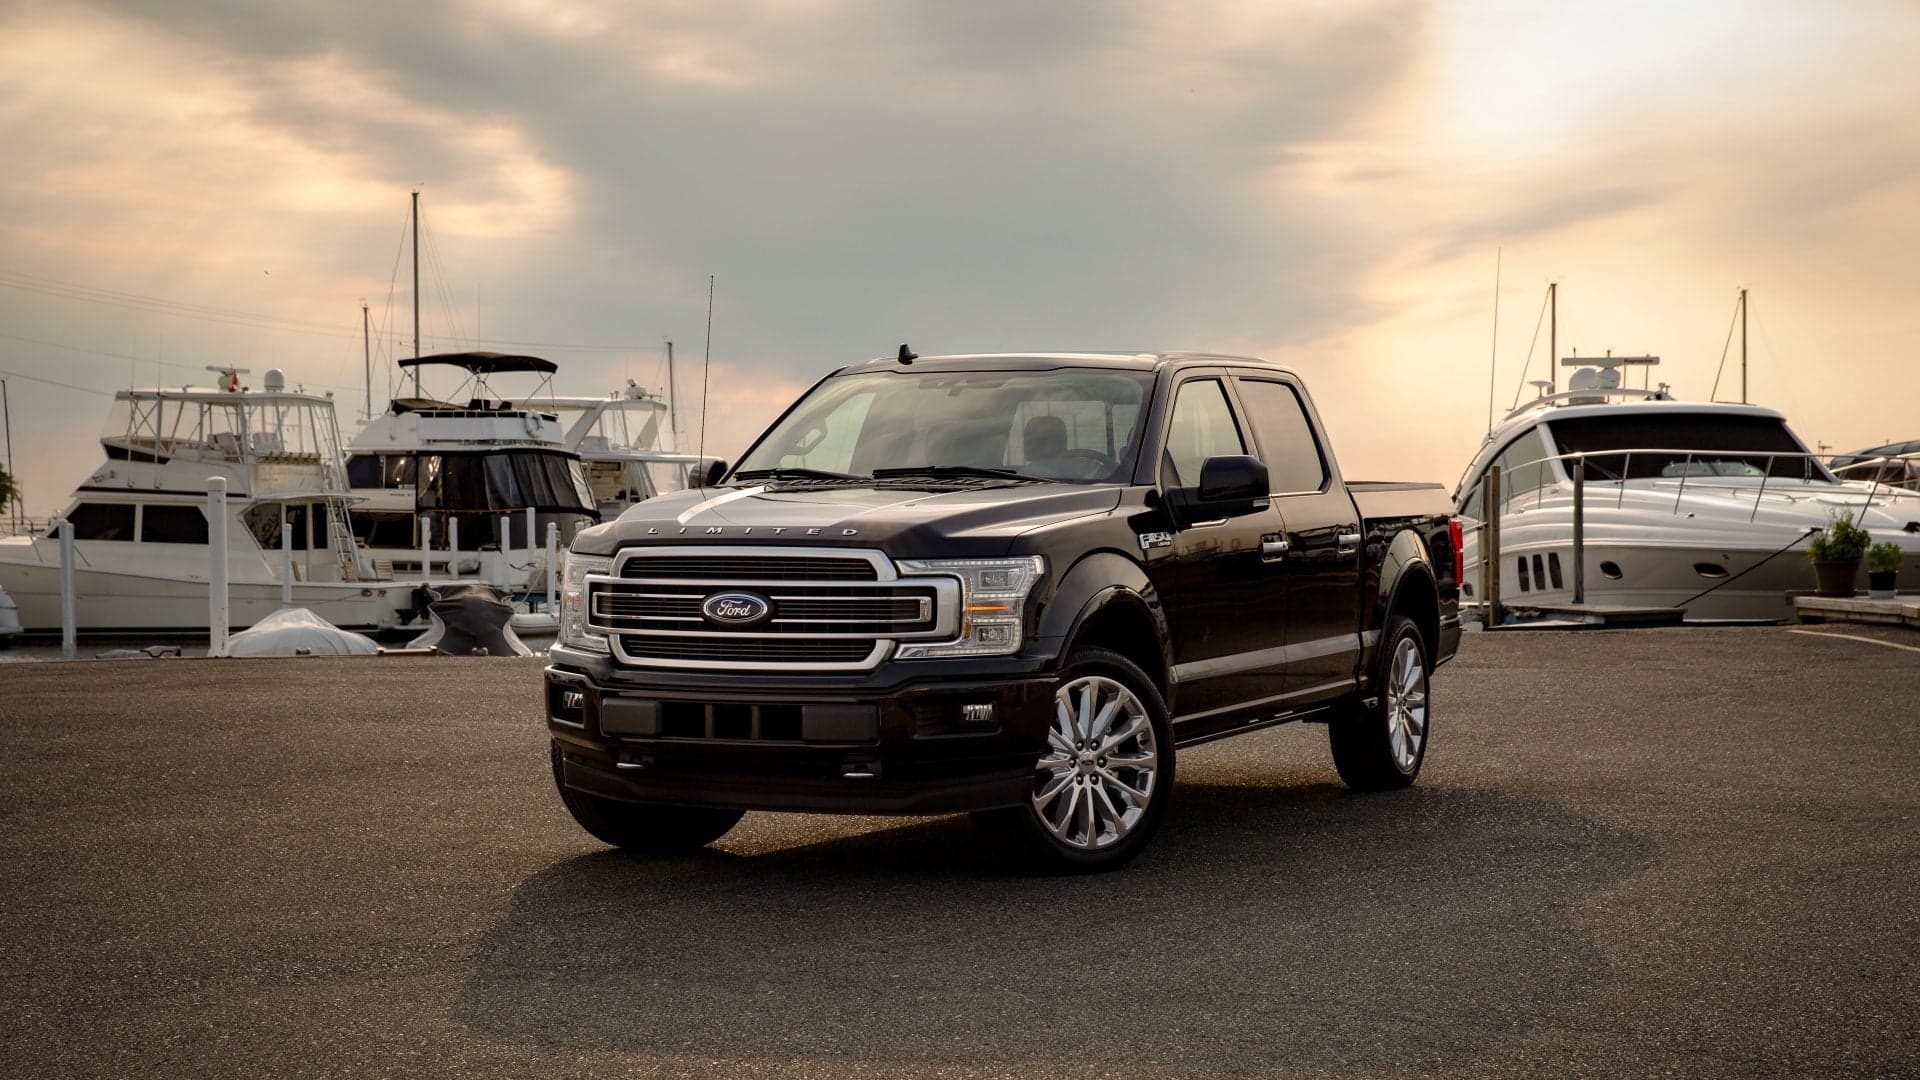 Ford Recalls F-150 and Super Duty Pickup Trucks Once Again for Risk of Catching Fire